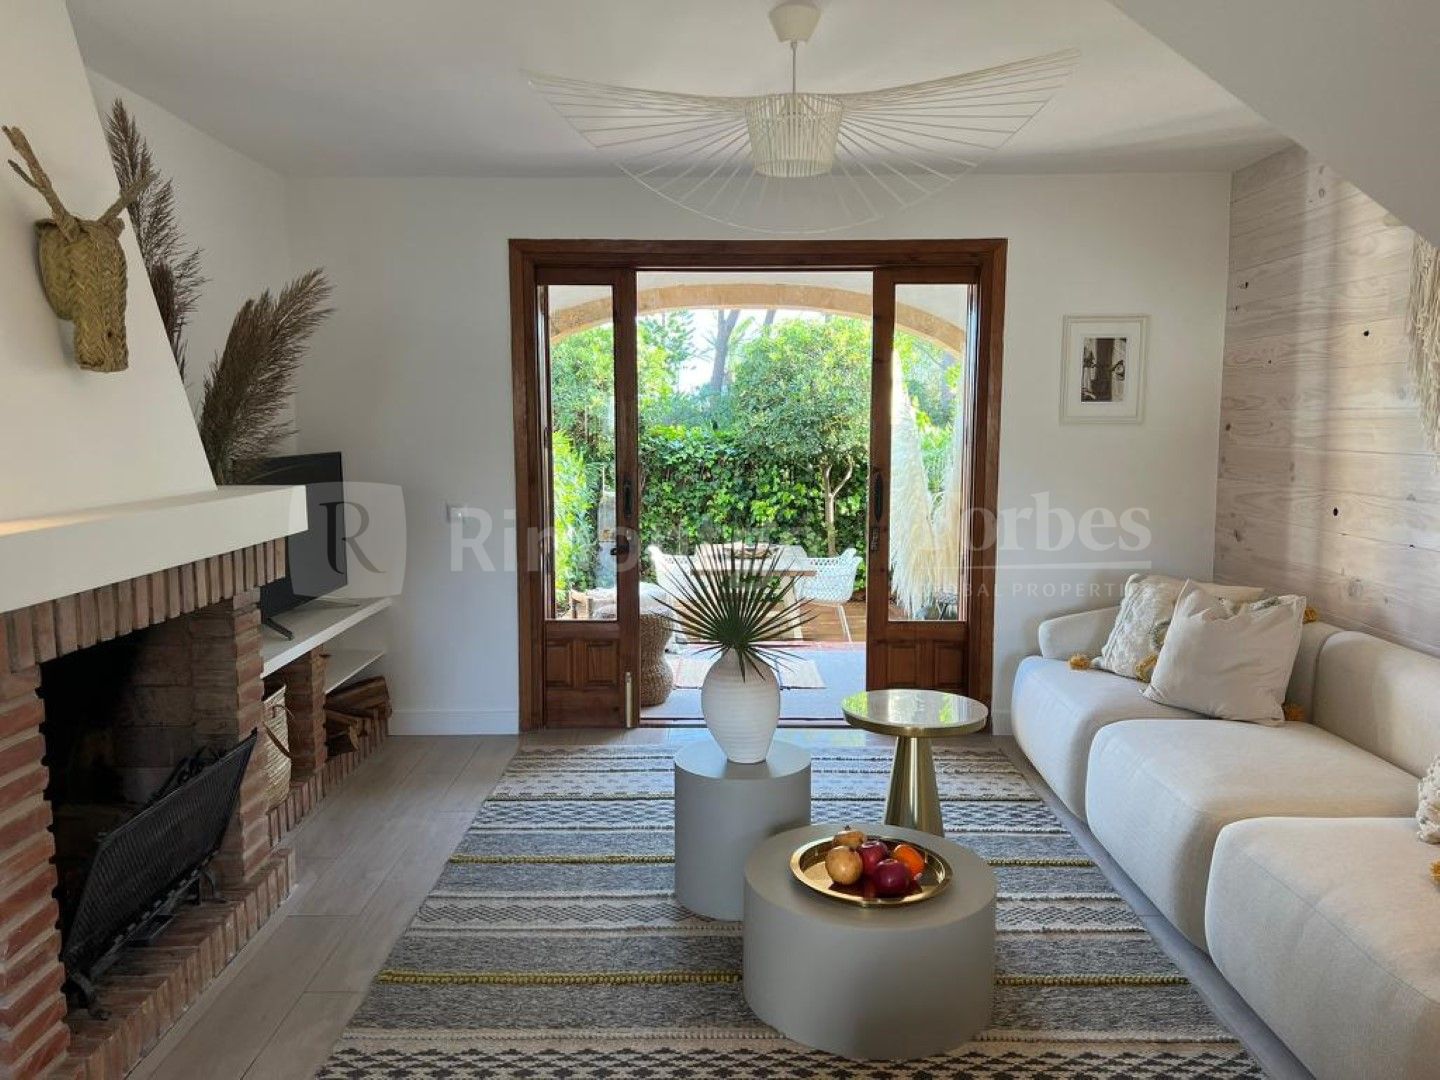 Charming townhouse, located just 50m from La Caleta beach in Jávea